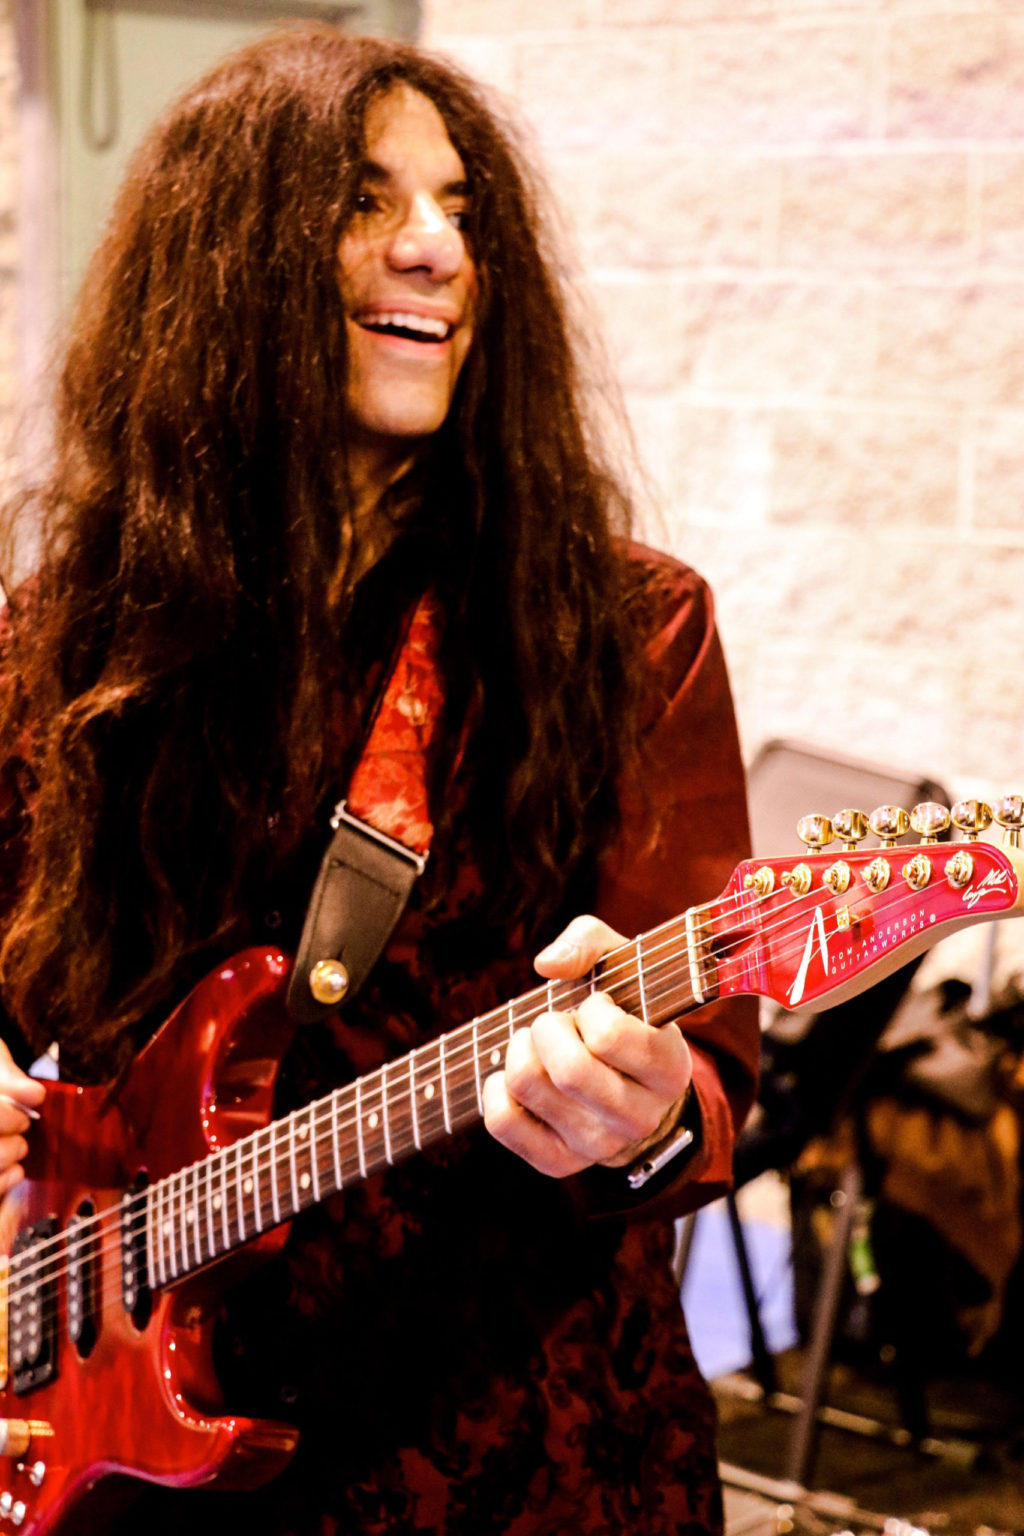 Mike Campese NAMM 2017 Performance.